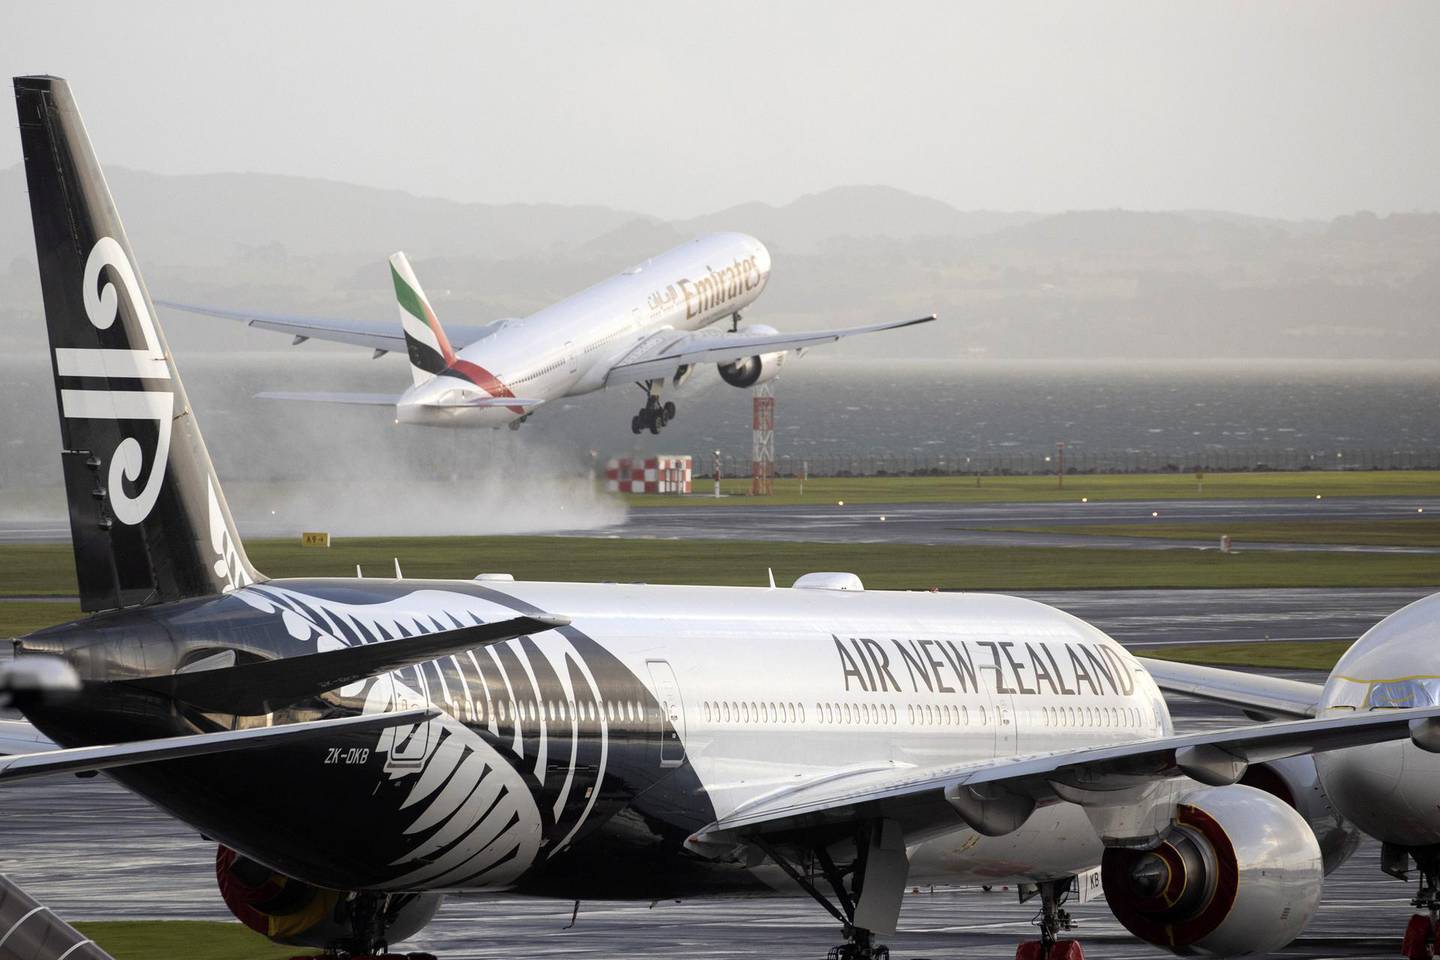 An Emirates Airlines aircraft takes off beyond an Air New Zealand Ltd. aircraft at the International Terminal of Auckland Airport in Auckland, New Zealand, on Tuesday, July 7, 2020. New Zealand’s government will limit the number of citizens flying home with the national airline to reduce pressure on its overflowing quarantine facilities. Photographer: Brendon O'Hagan/Bloomberg